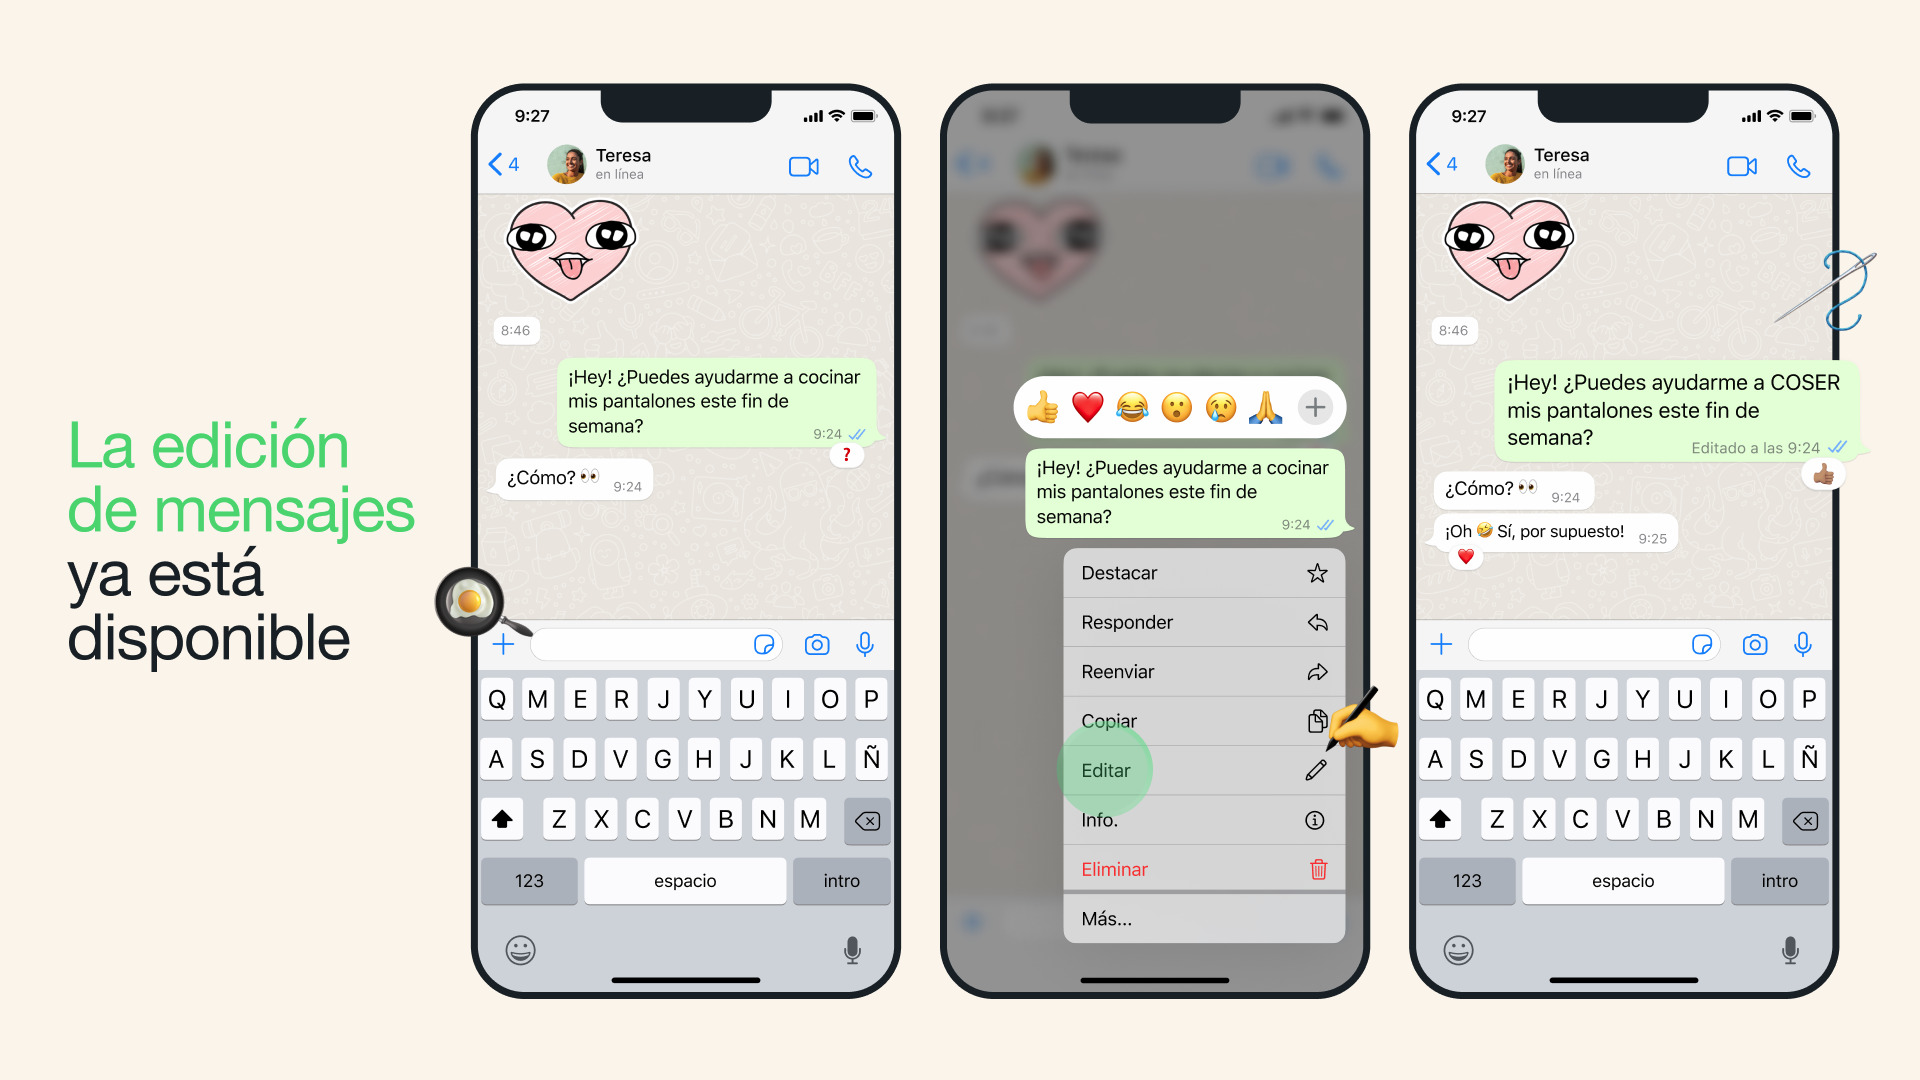 Now you can edit your WhatsApp messages

